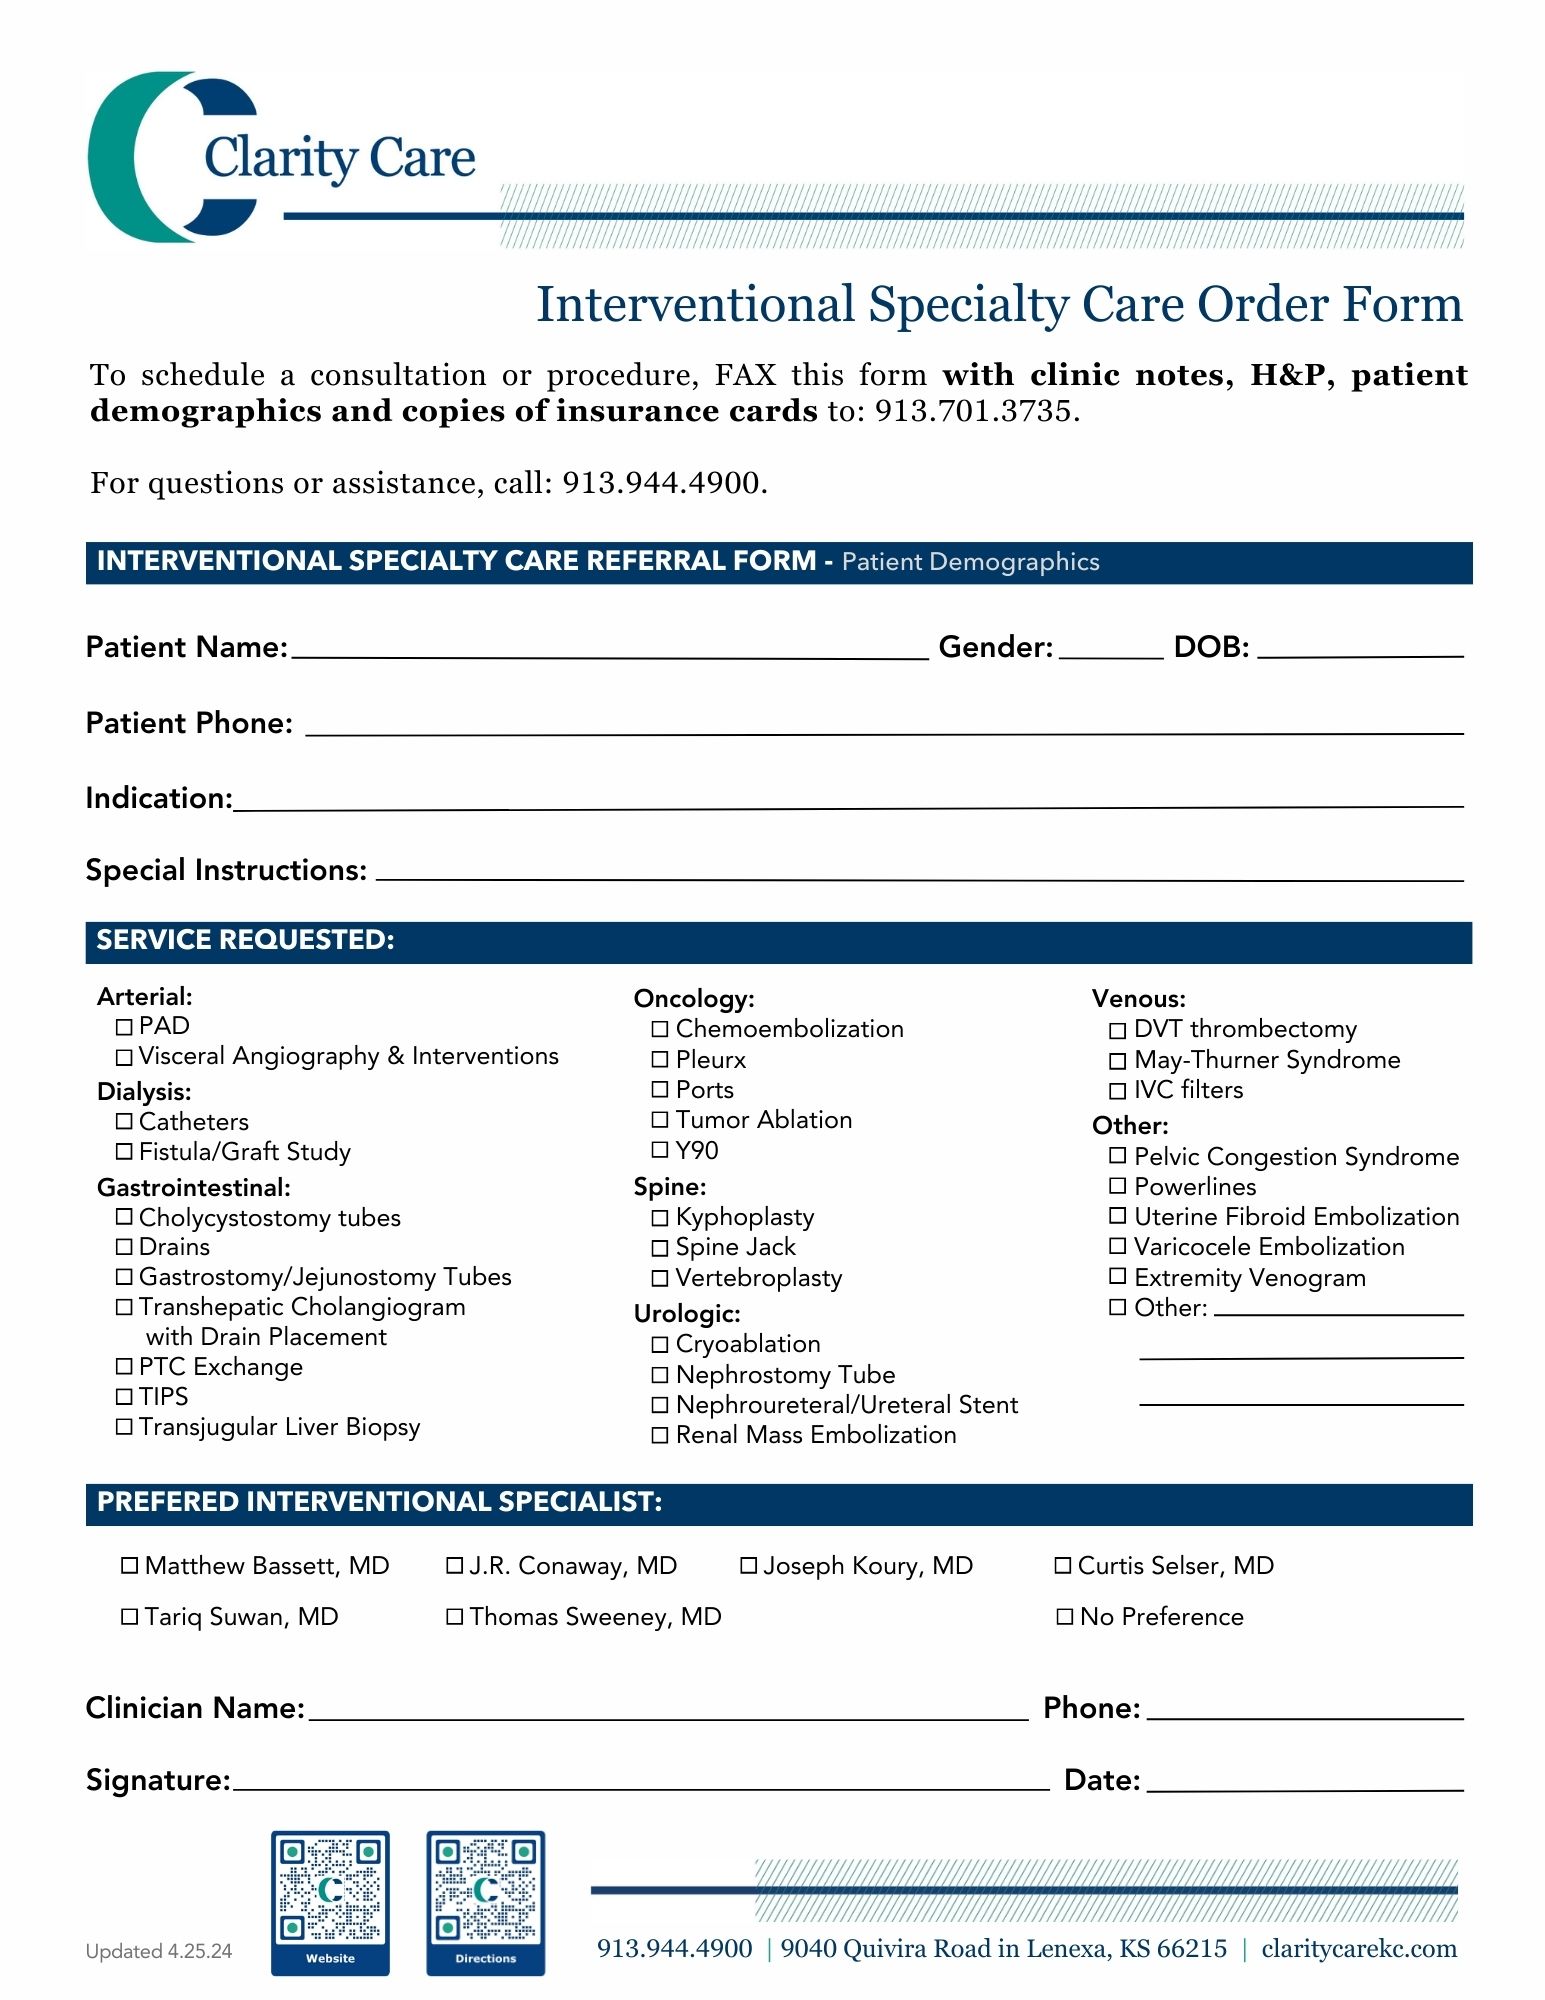 Interventional Specialty Care Form